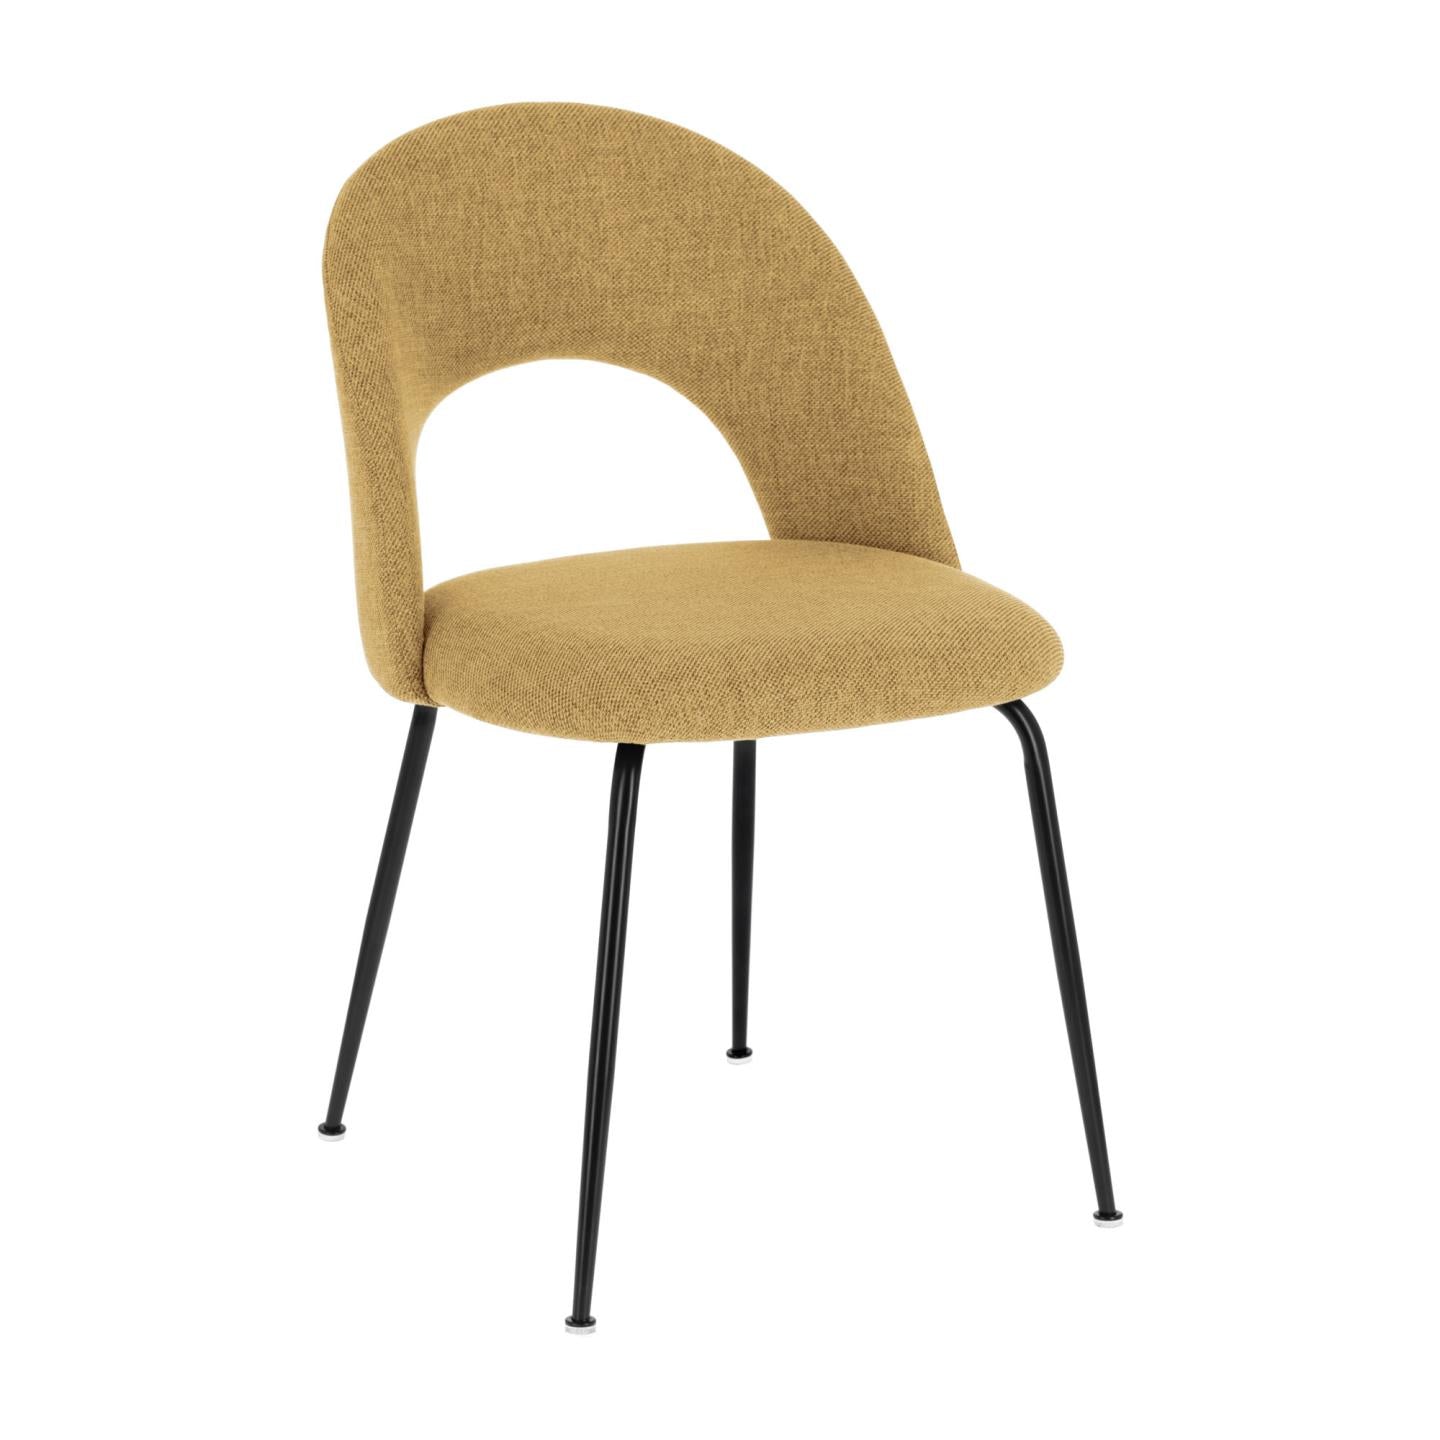 Mahalia dining chair in mustard with steel legs, with a black painted finish.